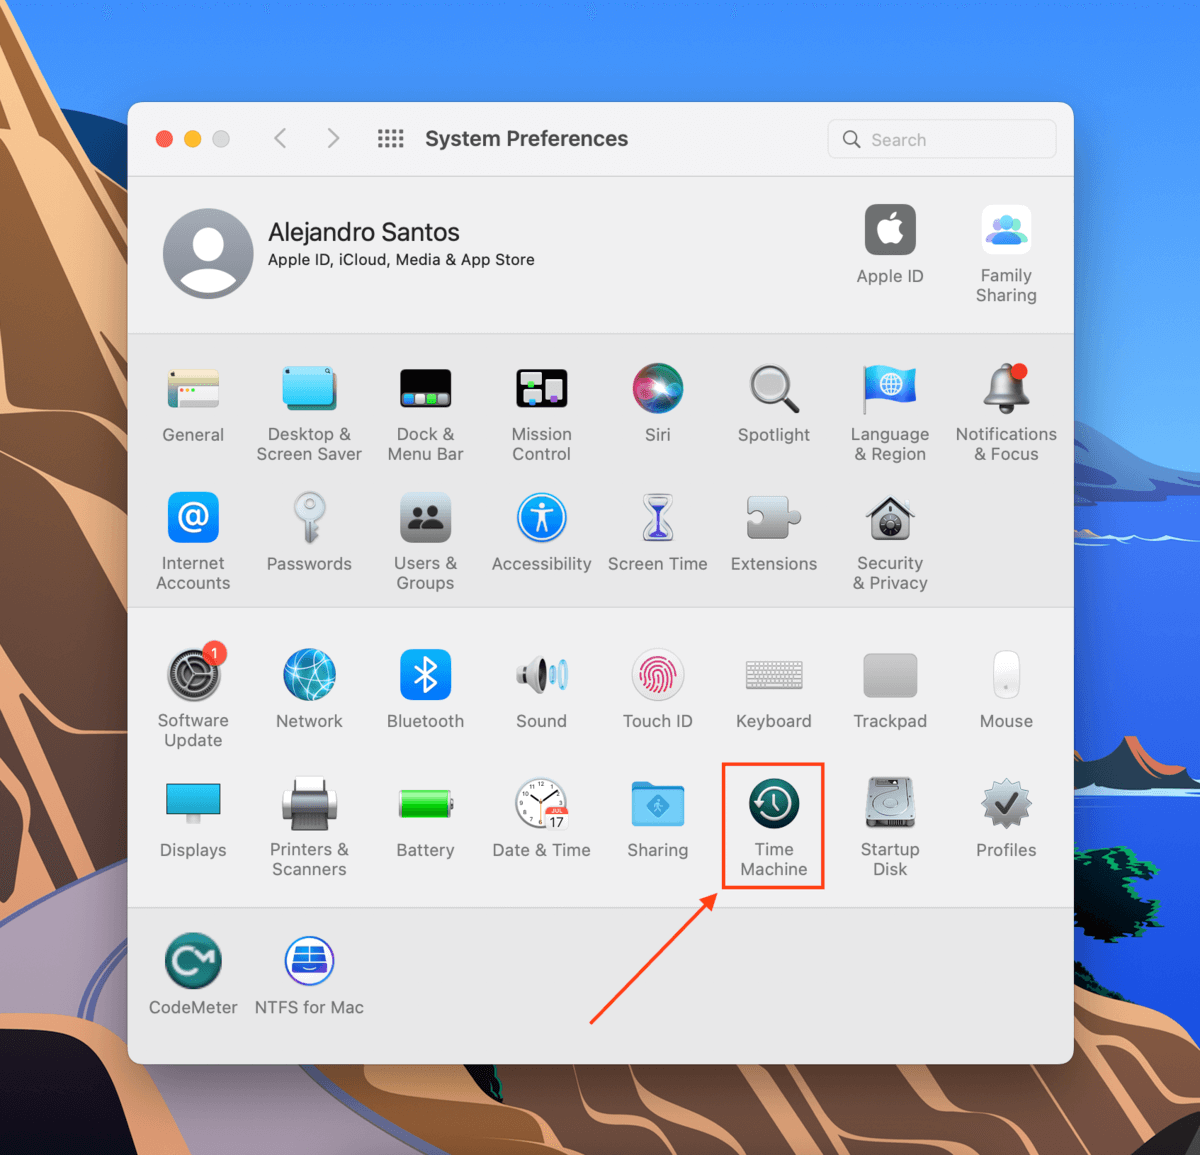 Time machine icon in System Preferences window